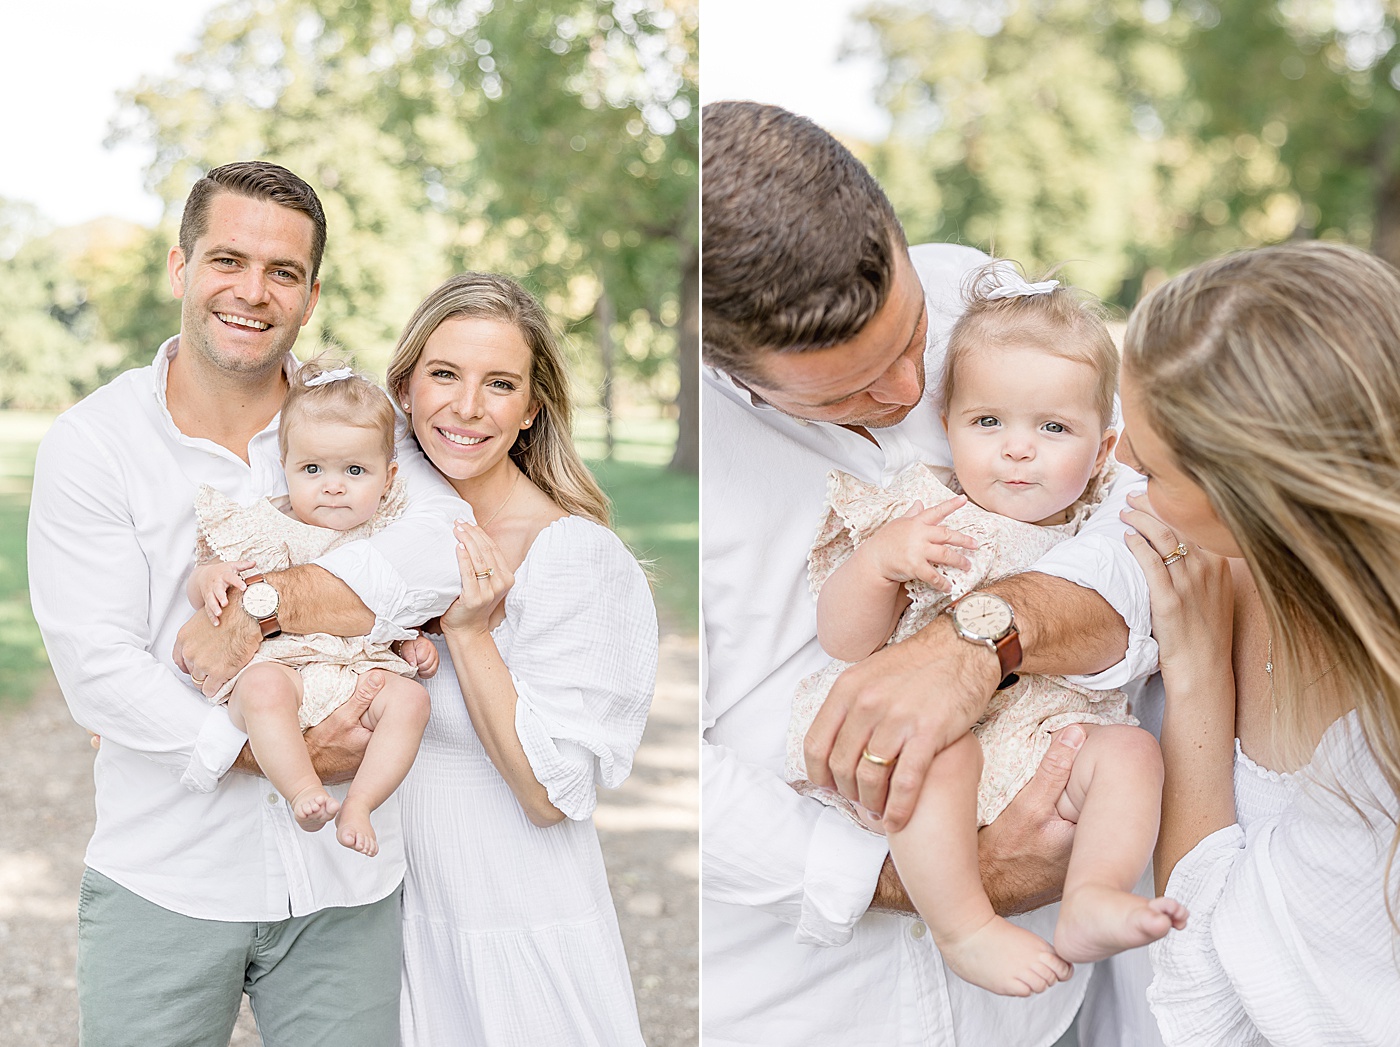 Outdoor family photos for Mom, Dad and 7 month old daughter at Sherwood Island | Kristin Wood Photography